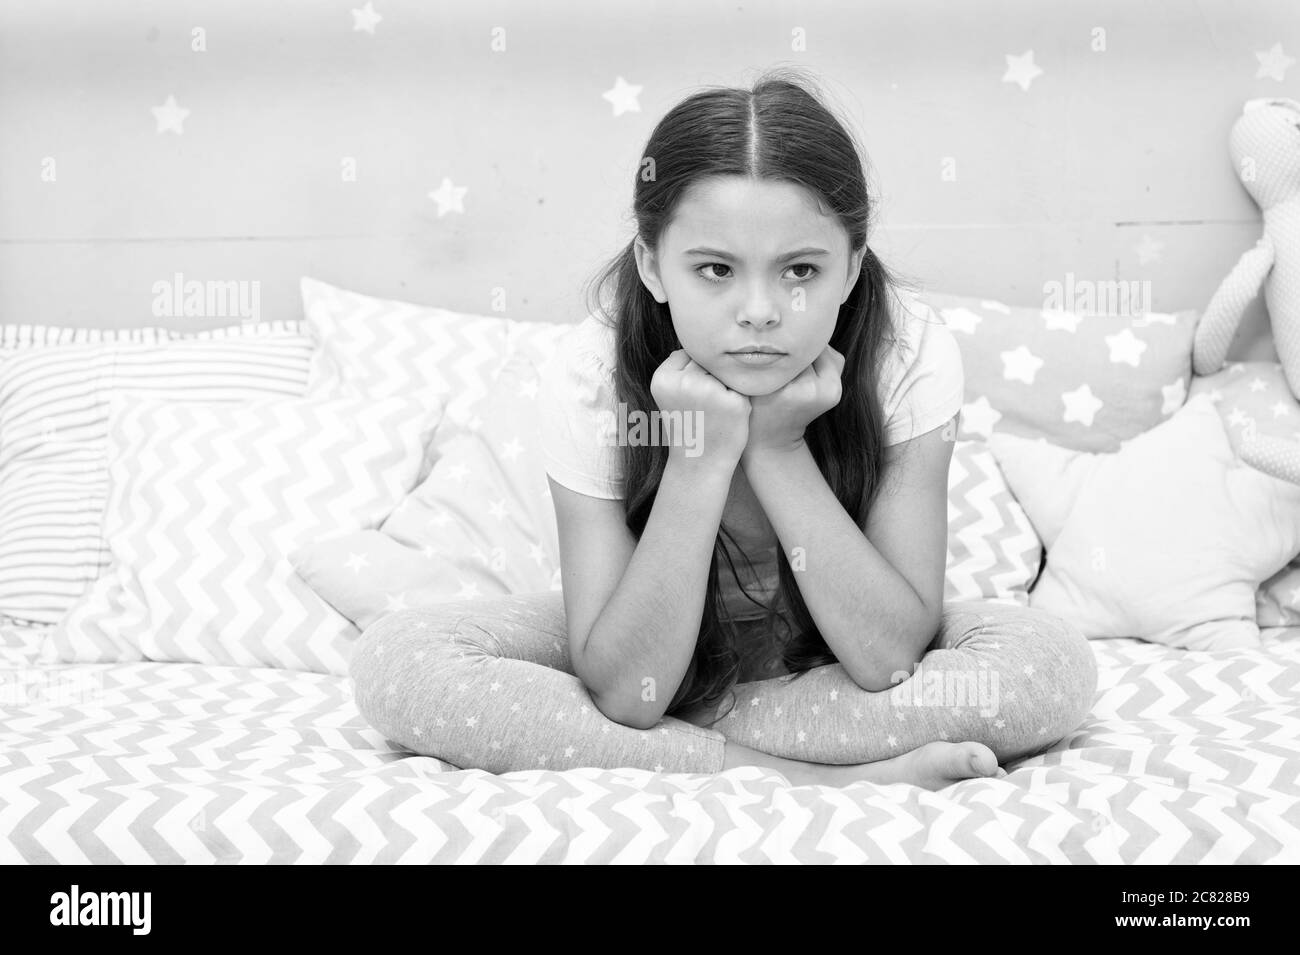 Unhappy cutie. Unhappy baby sit in bed. Little child with unhappy look ...